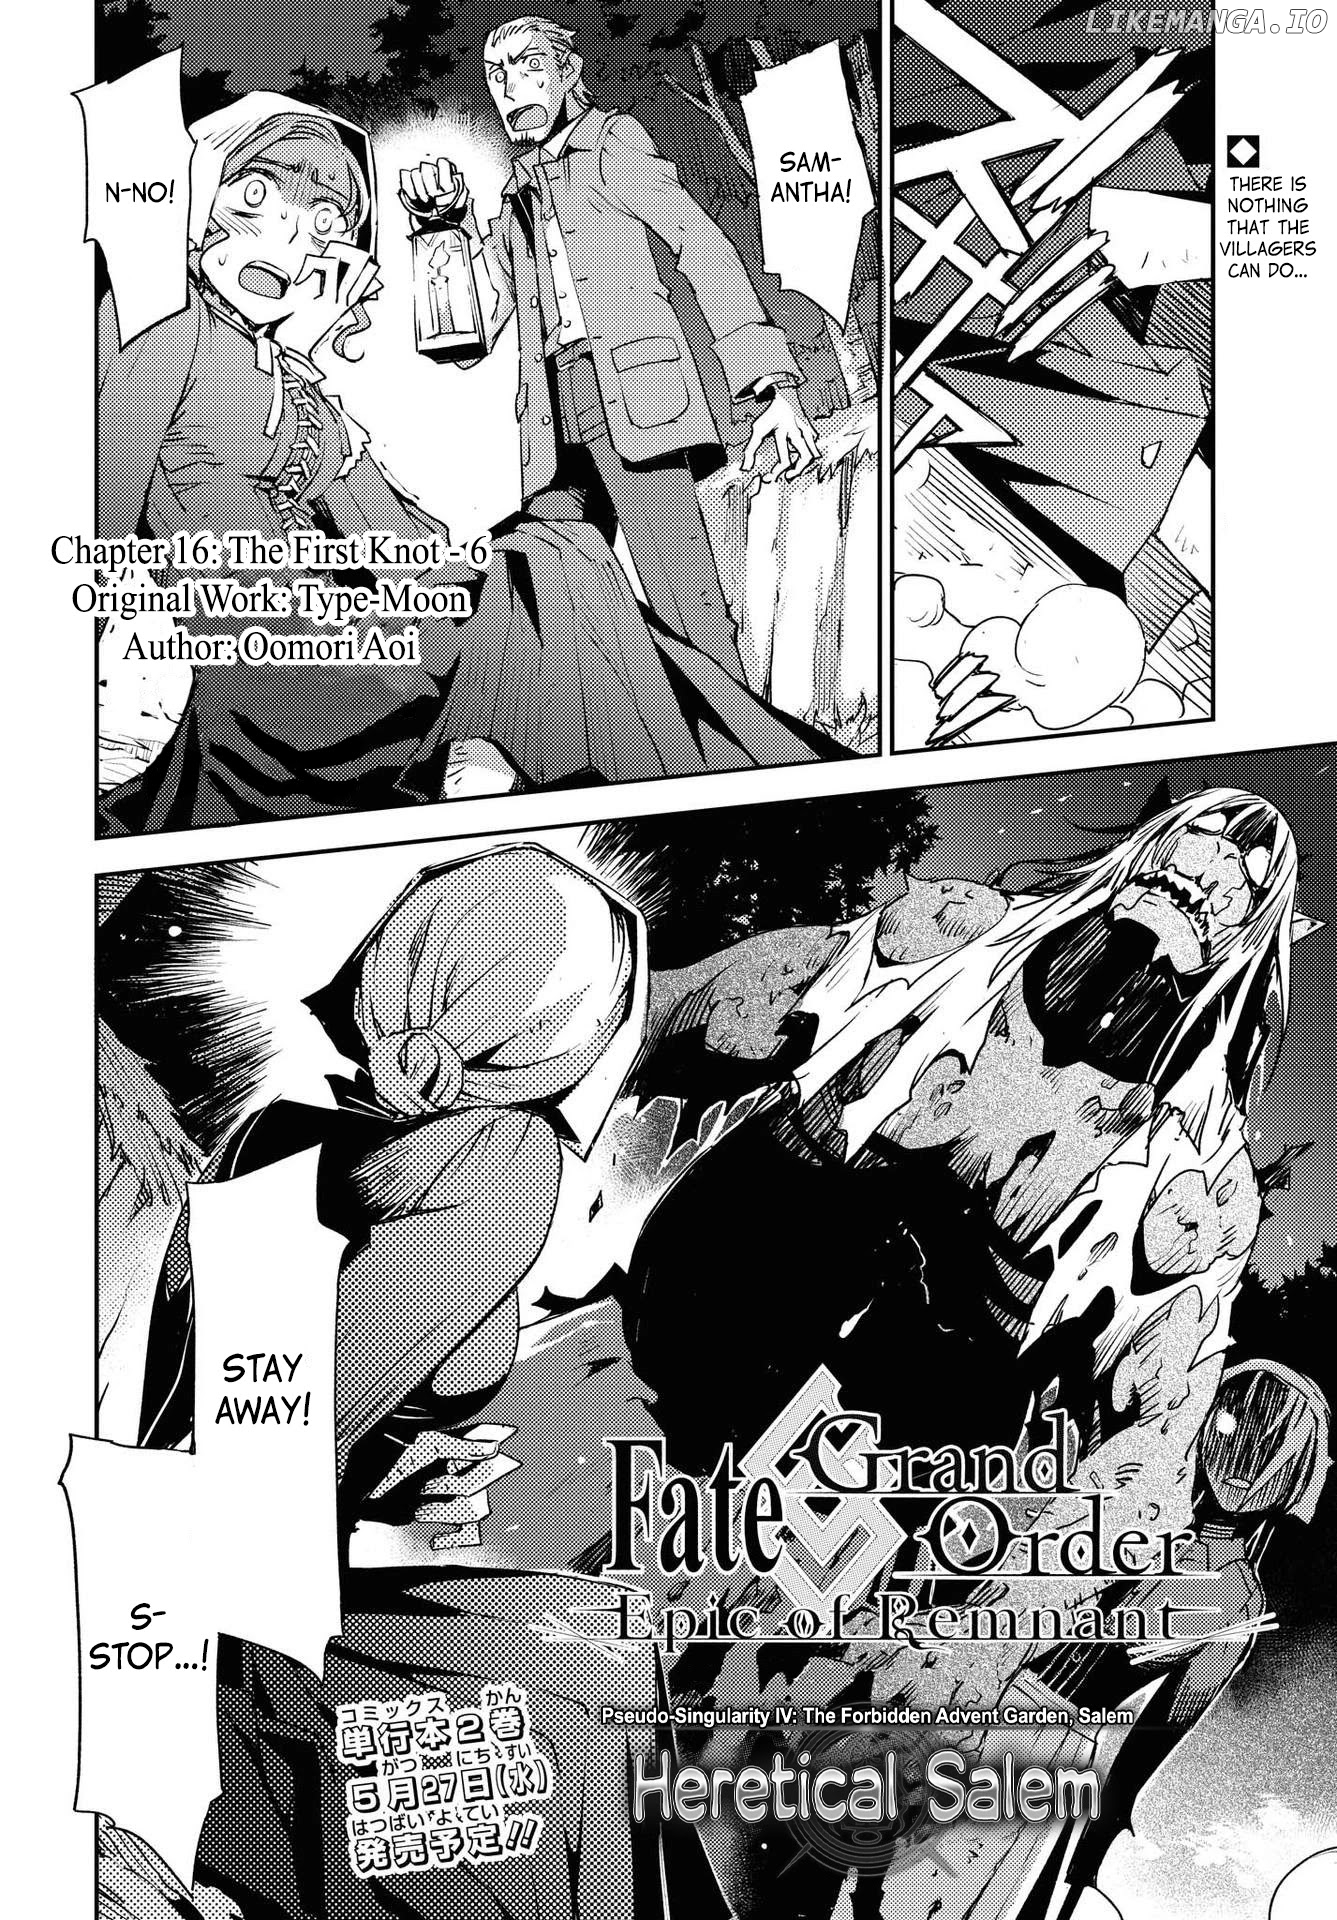 Fate/Grand Order: Epic of Remnant - Subspecies Singularity IV: Taboo Advent Salem: Salem of Heresy chapter 16 - page 30